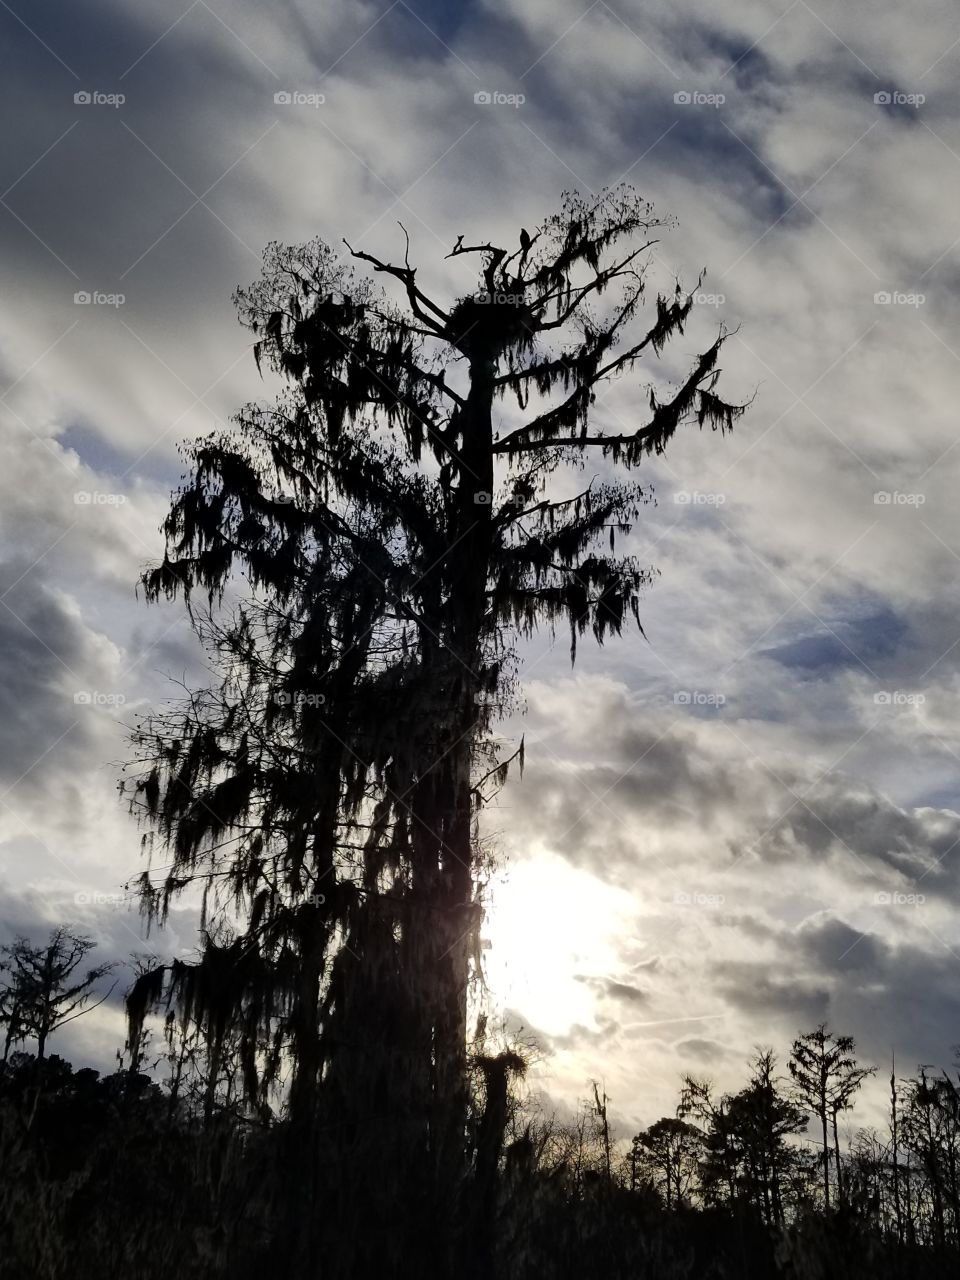 mossy tree with eagle nest